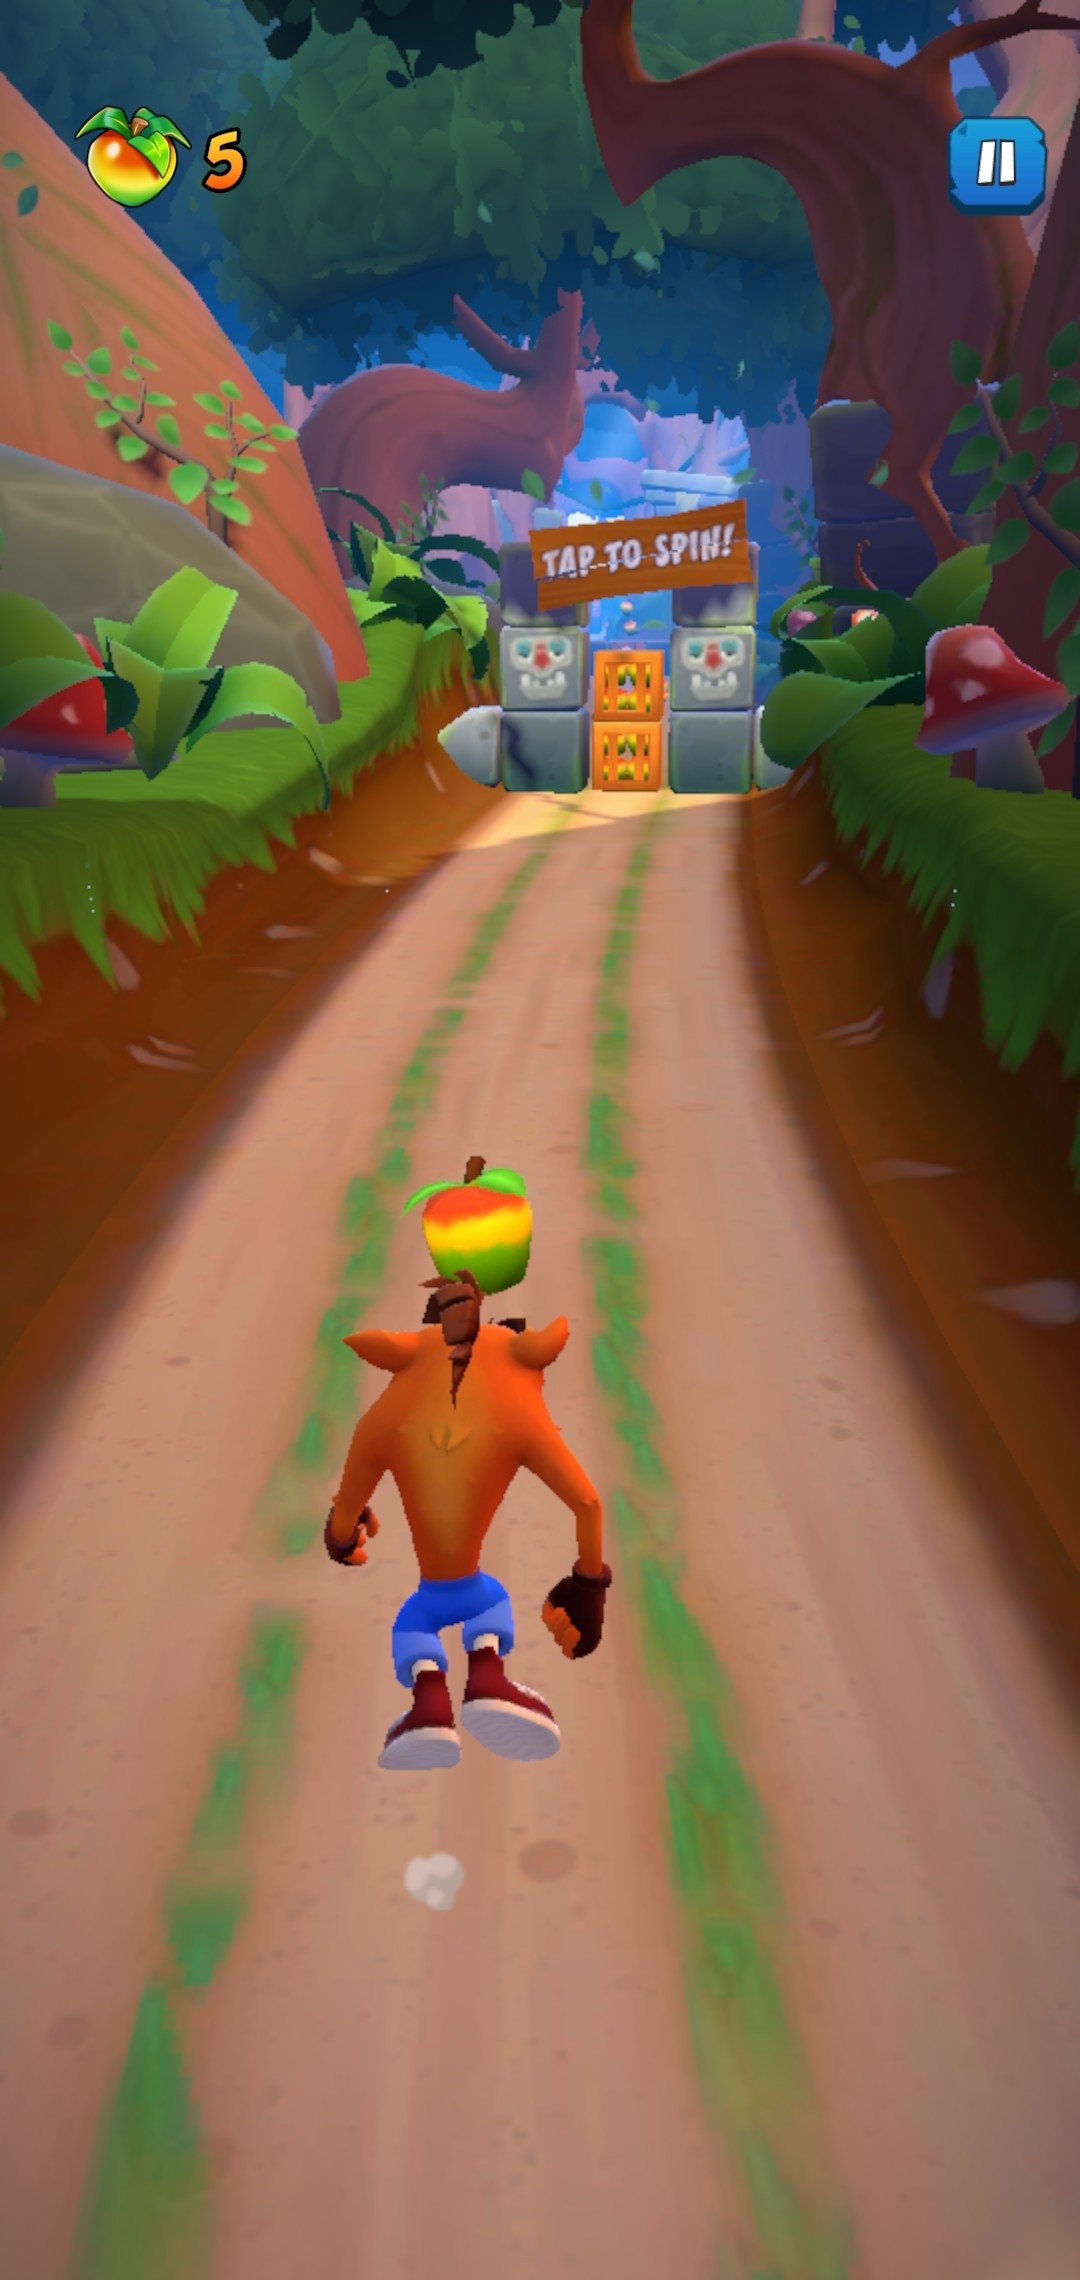 Crash Bandicoot: On the Run!': Legendary Game Is Now on Mobile